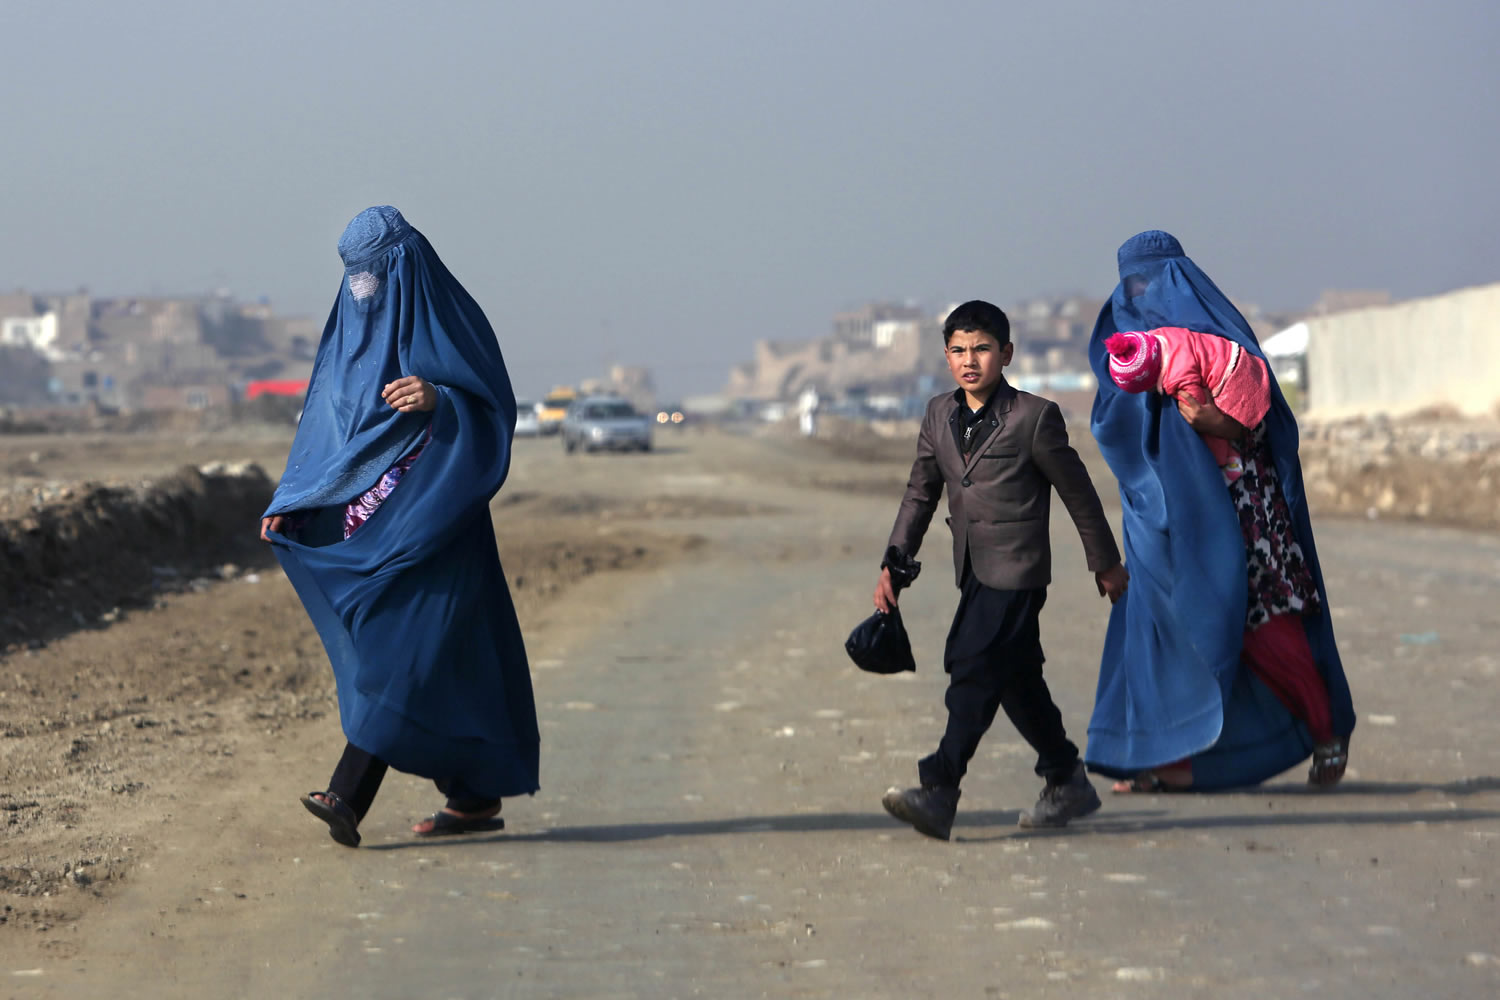 Human Rights Watch asks Afghanistan to end indefinite detentions without trial